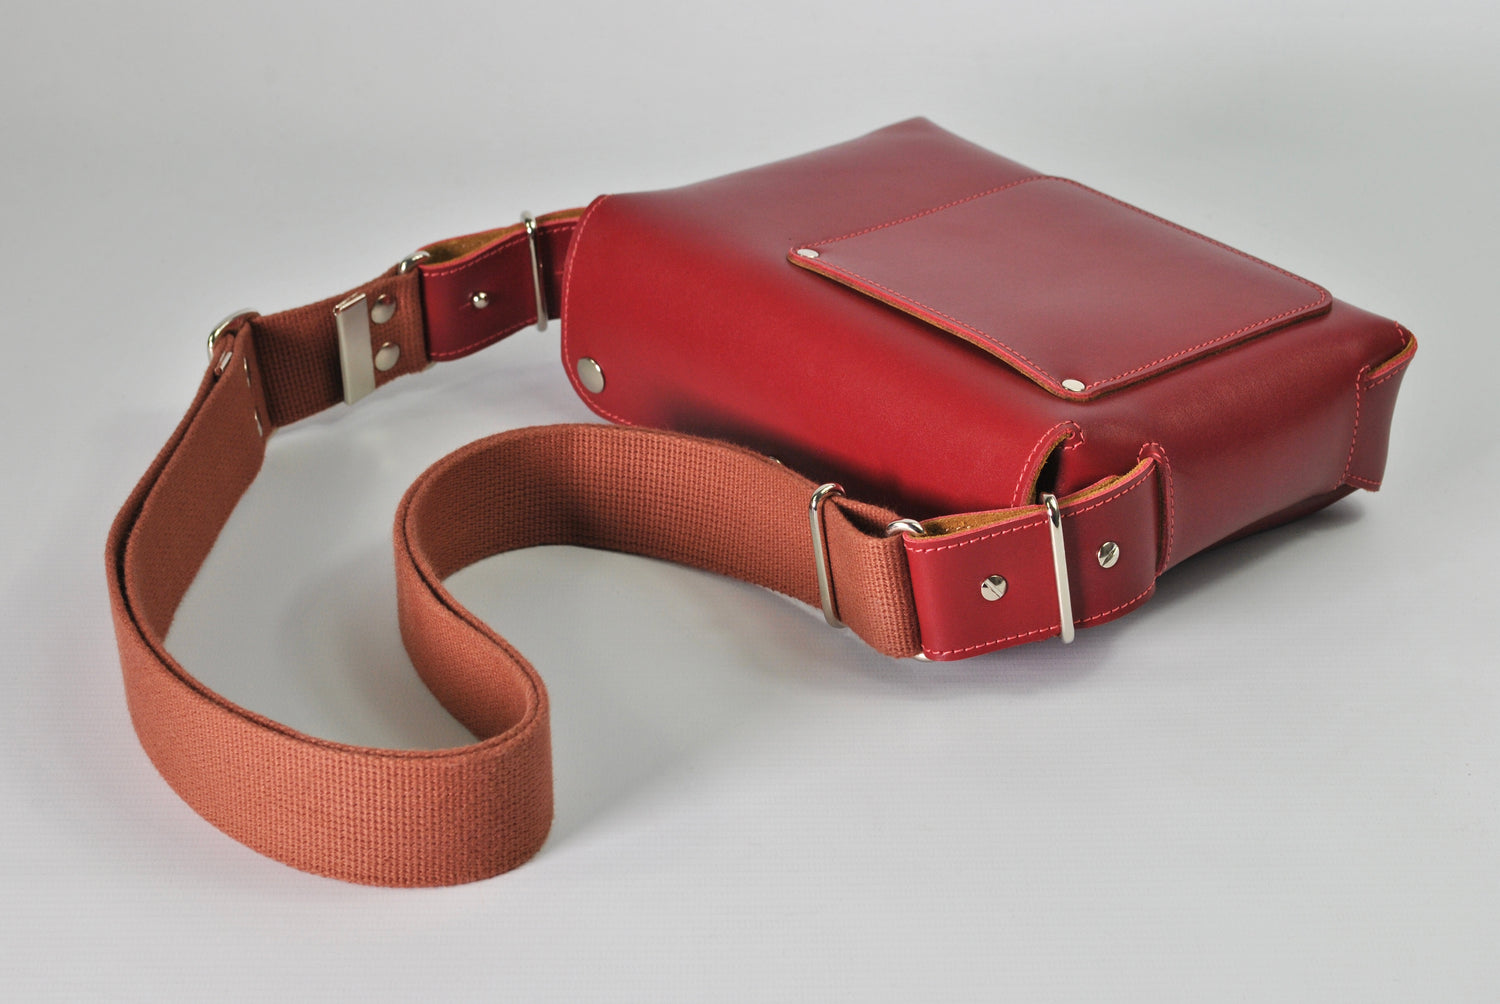 Red & Tan Leather Crossbody Bag Casual Everyday Carry